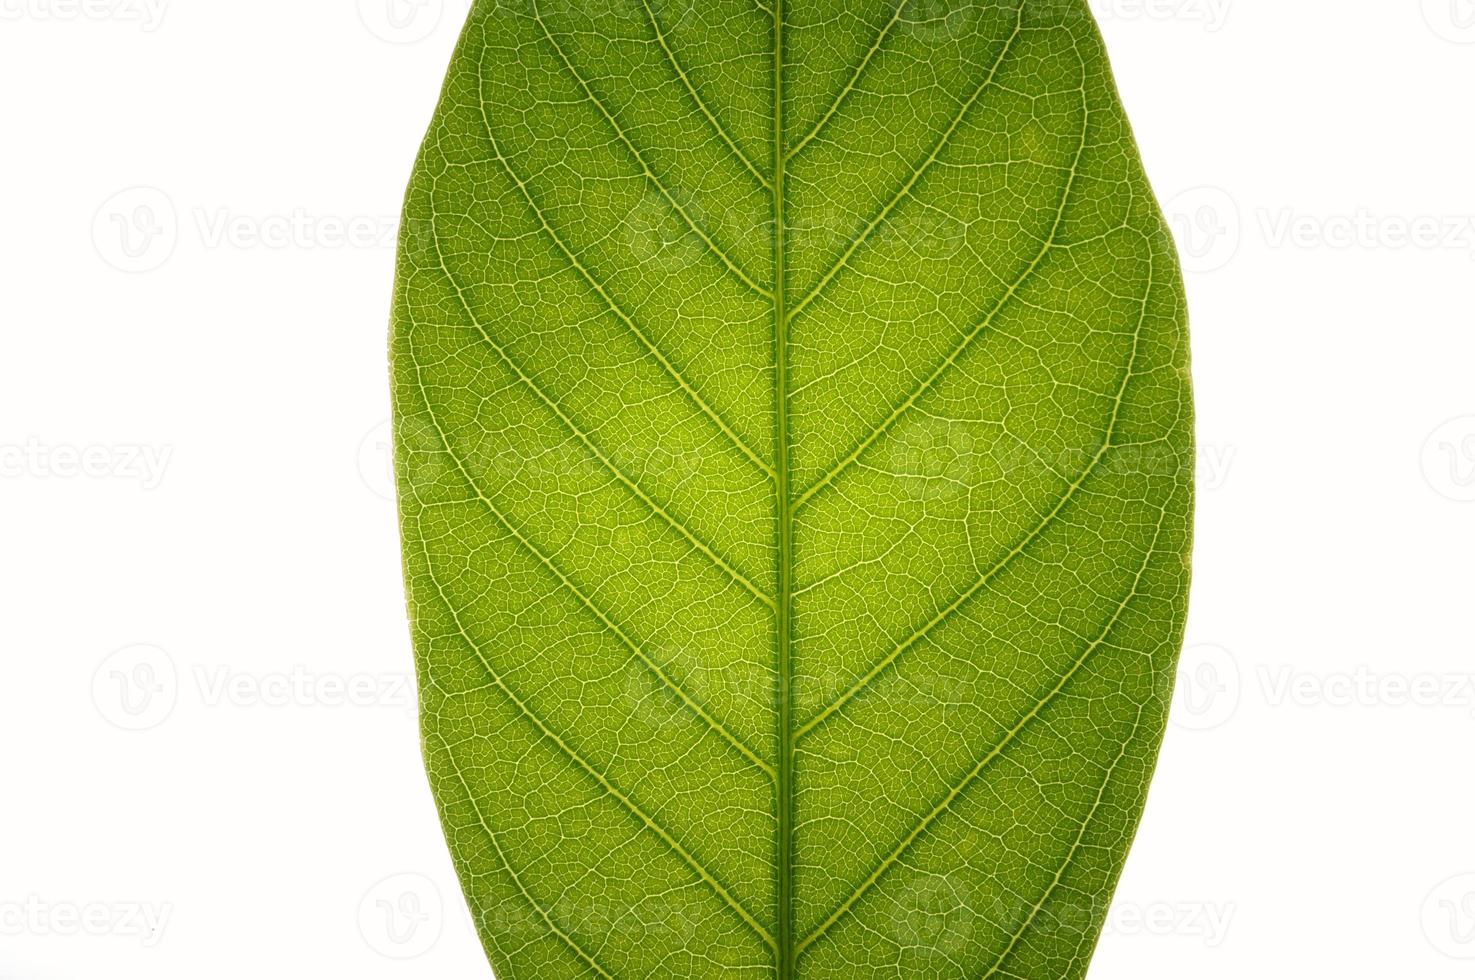 Leaf detail and texture isolated on white background. photo